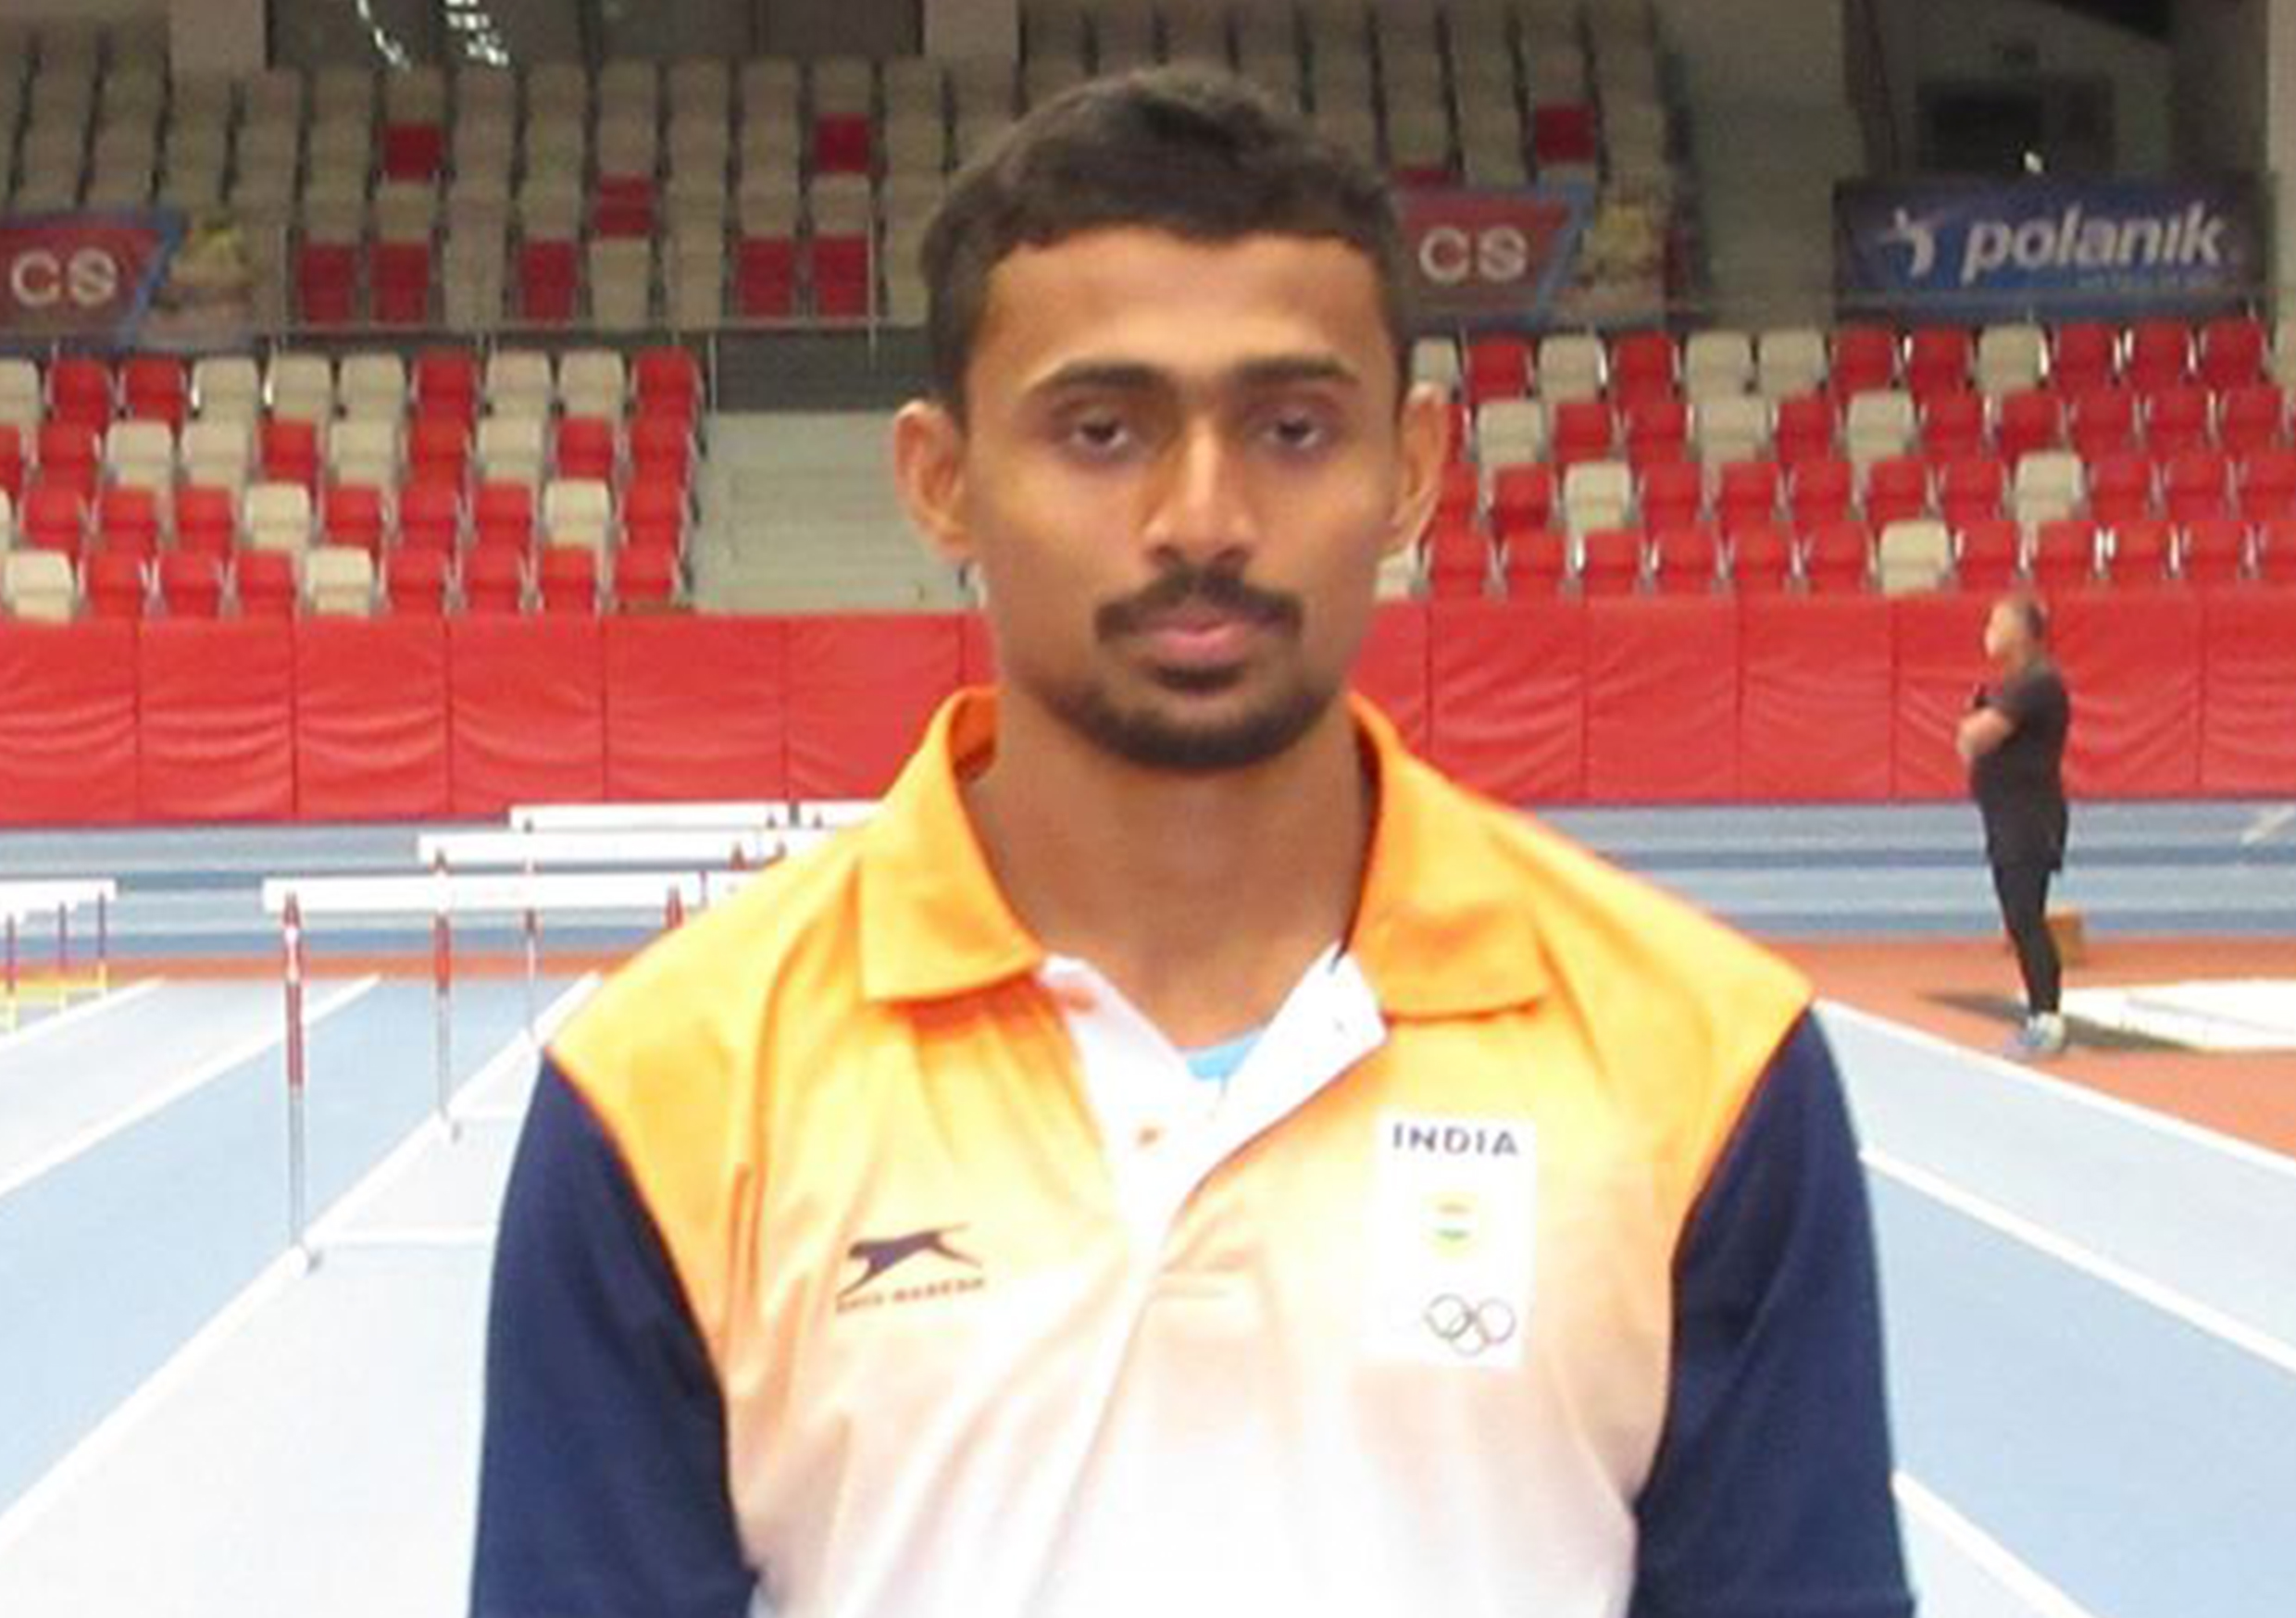 Mohammad Anas qualifies for Olympics in 400m; India’s contingent crosses 100 for first time